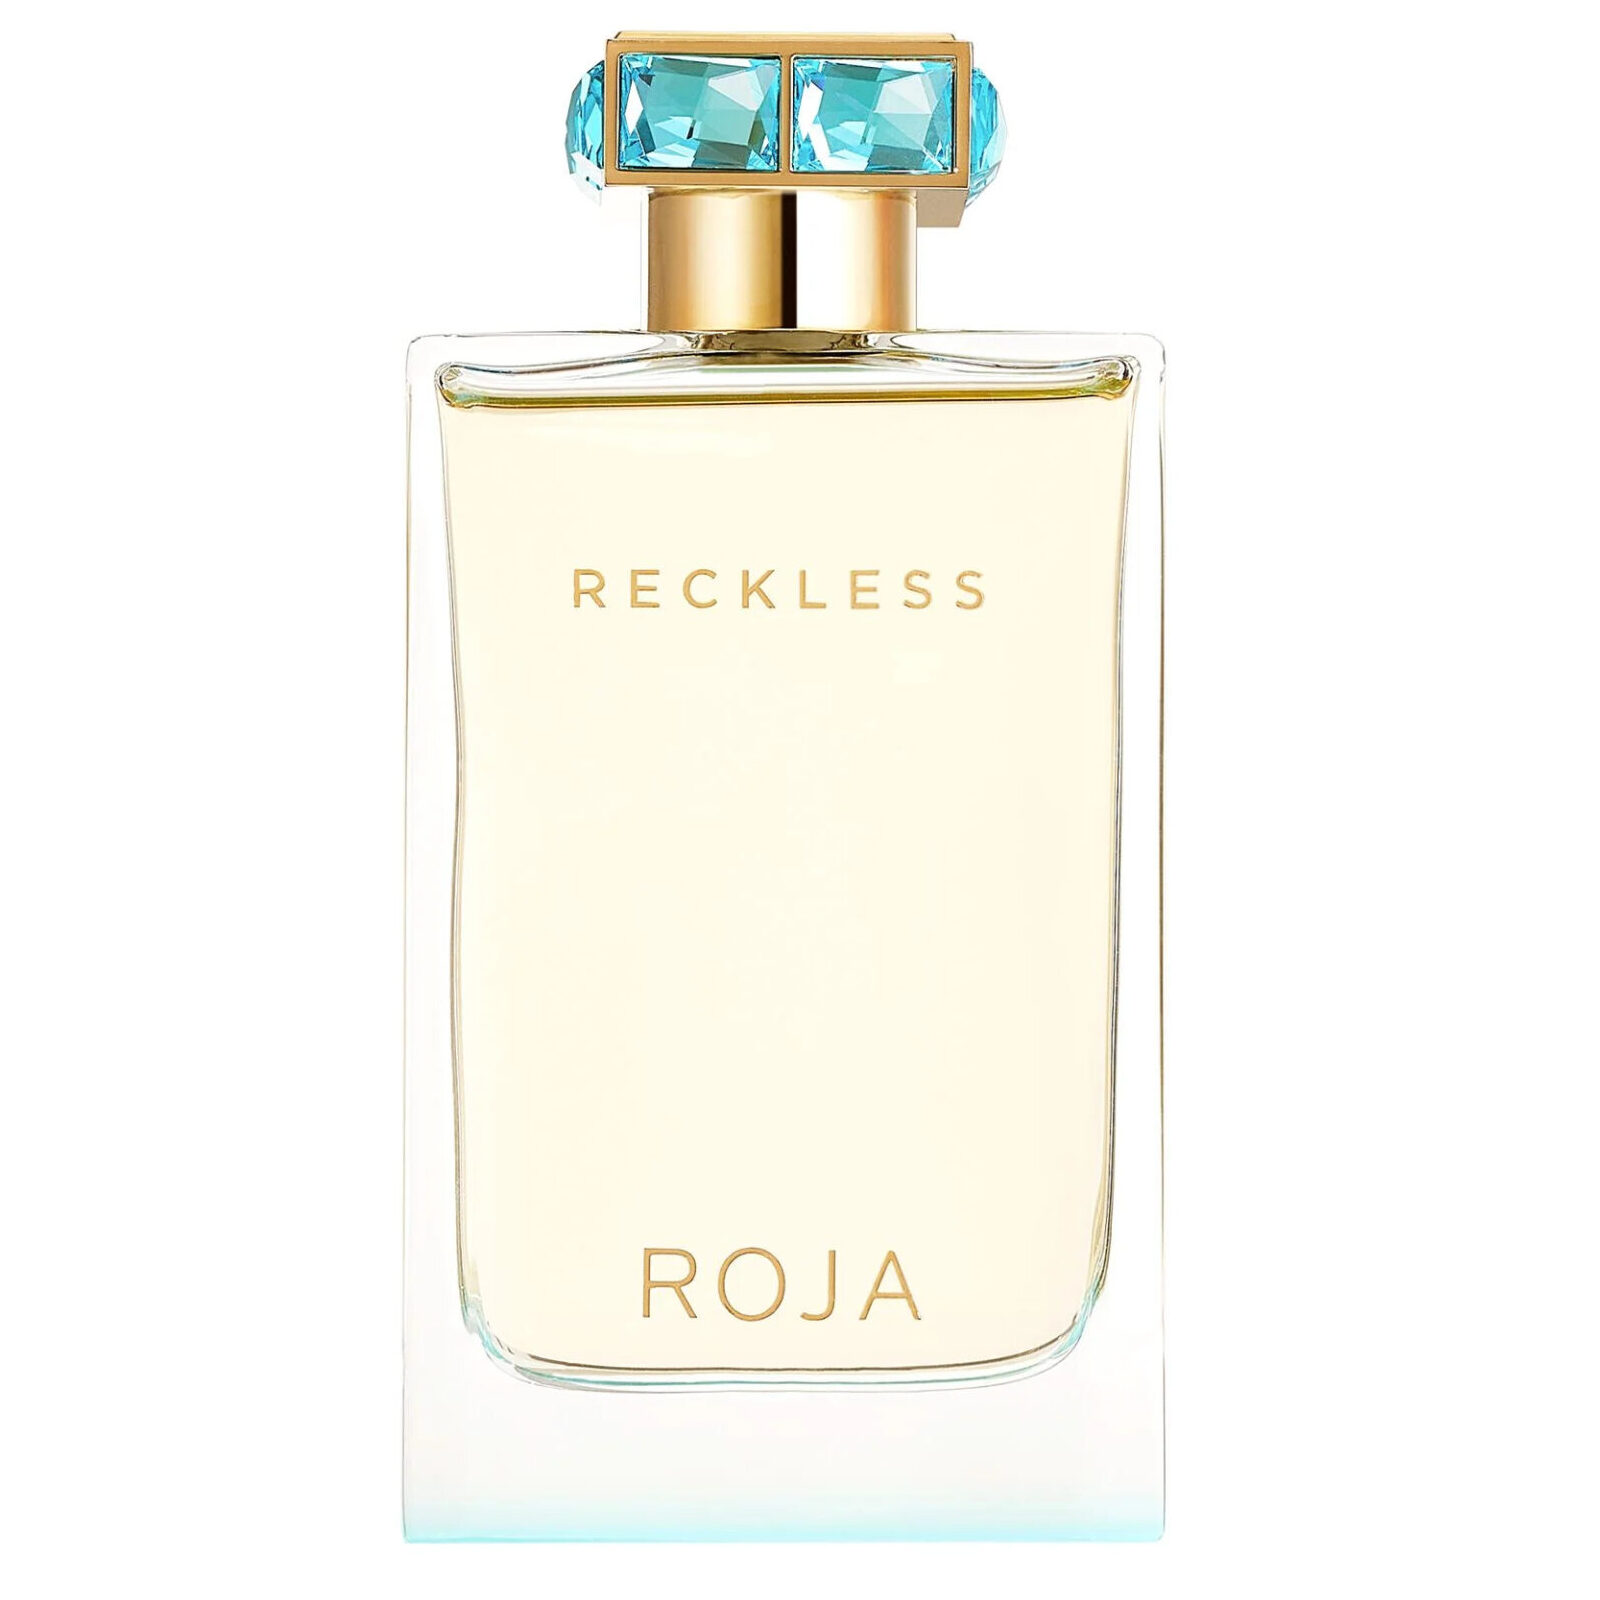 Roja "Must-Have" Niche Fragrances For Fall